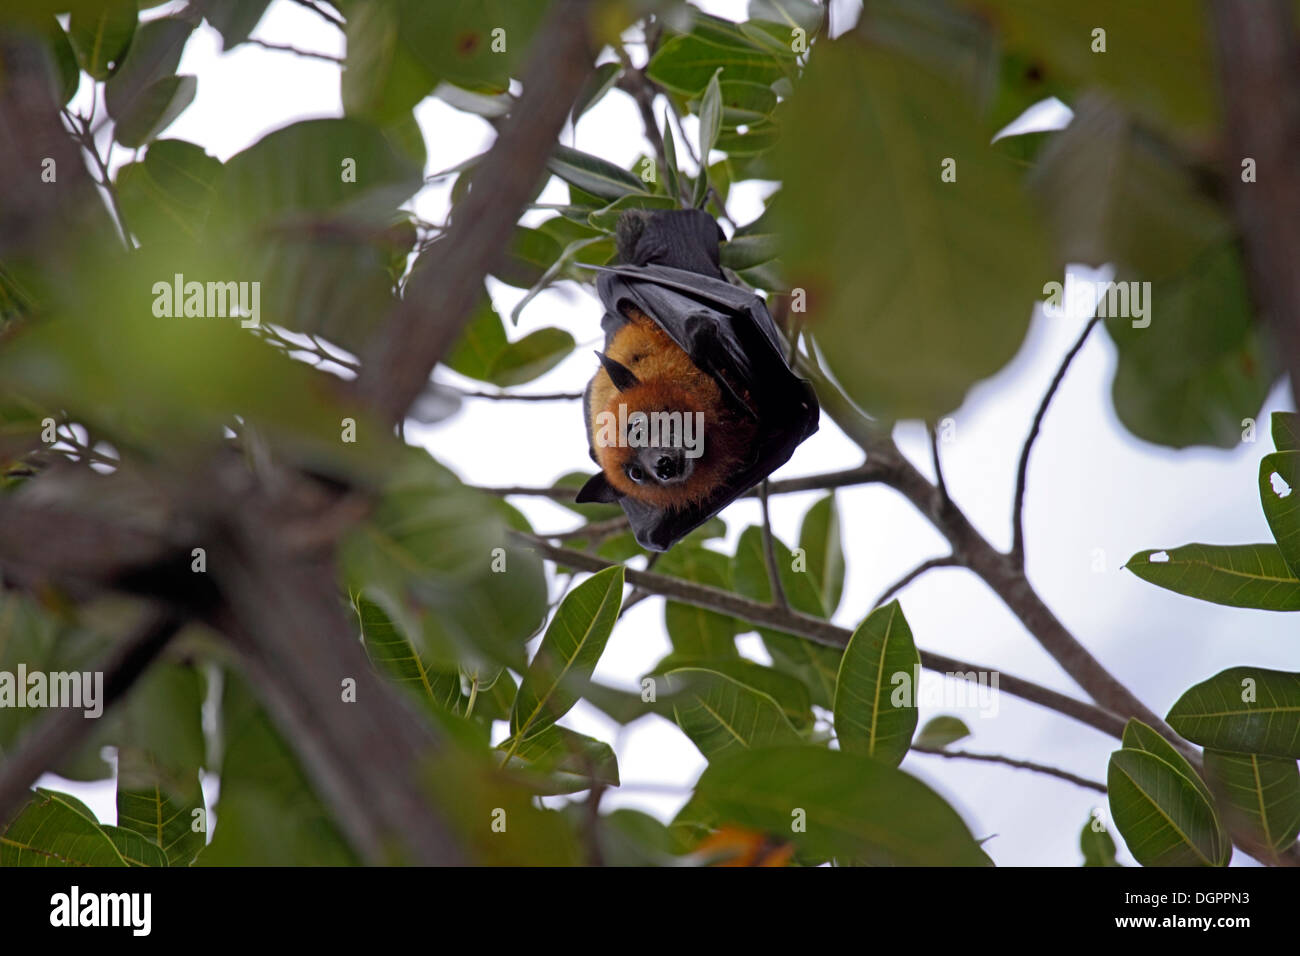 Seychelles fruit bat or Flying fox hanging down from branch Stock Photo